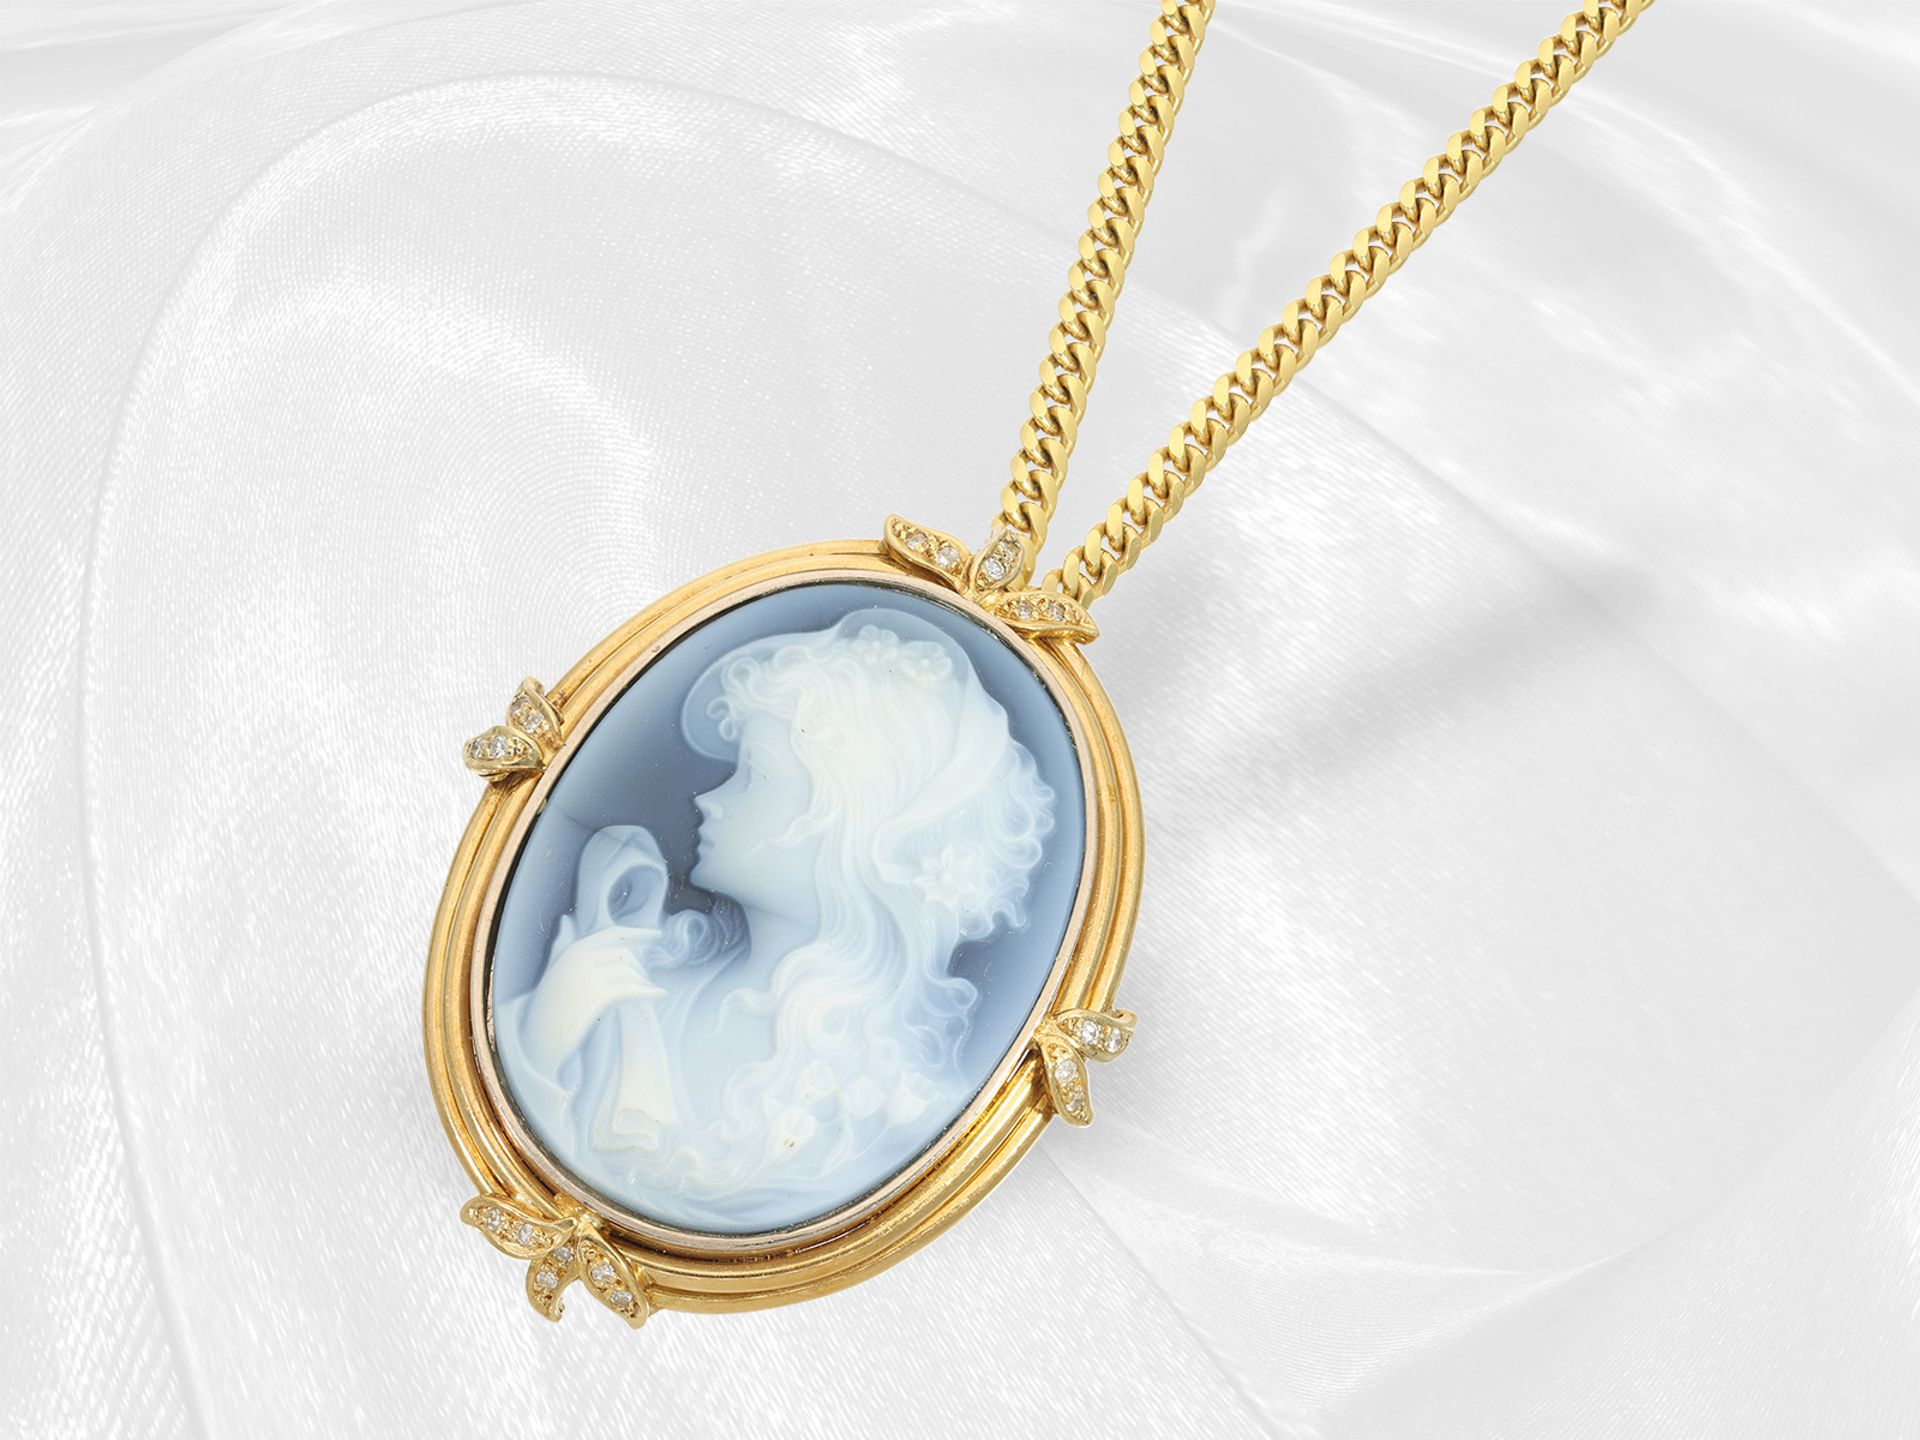 Solid chain and very beautiful handmade gold 18K cameo pendant, can also be worn as a brooch